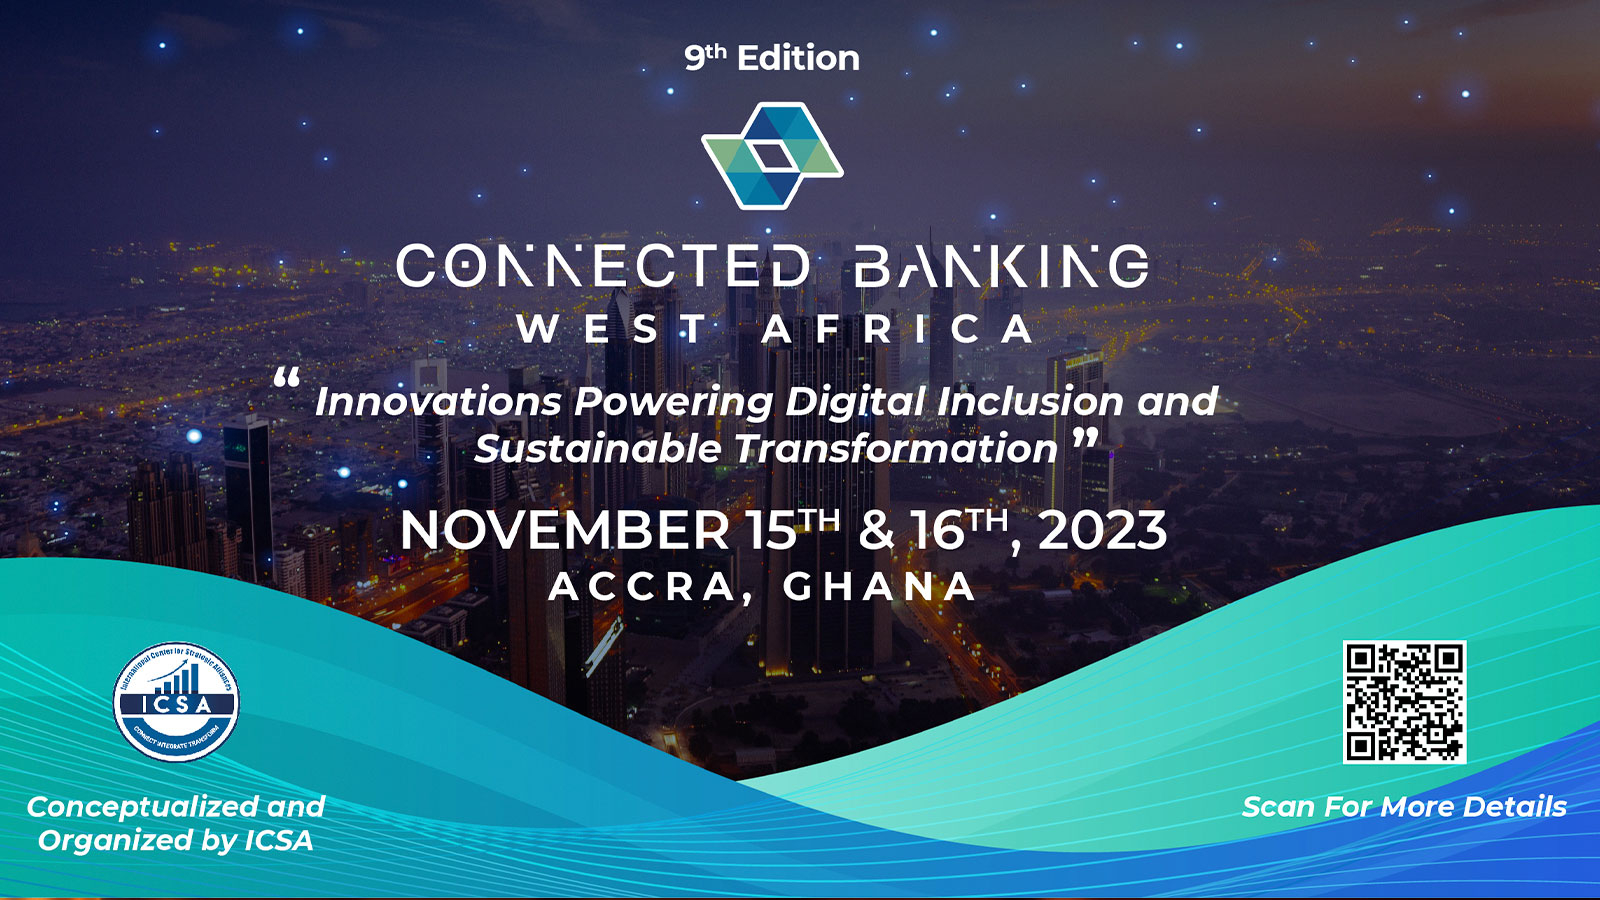 The 9th Edition Connected Banking Summit - West Africa will be held on the 15th and 16th of November in Accra, Ghana